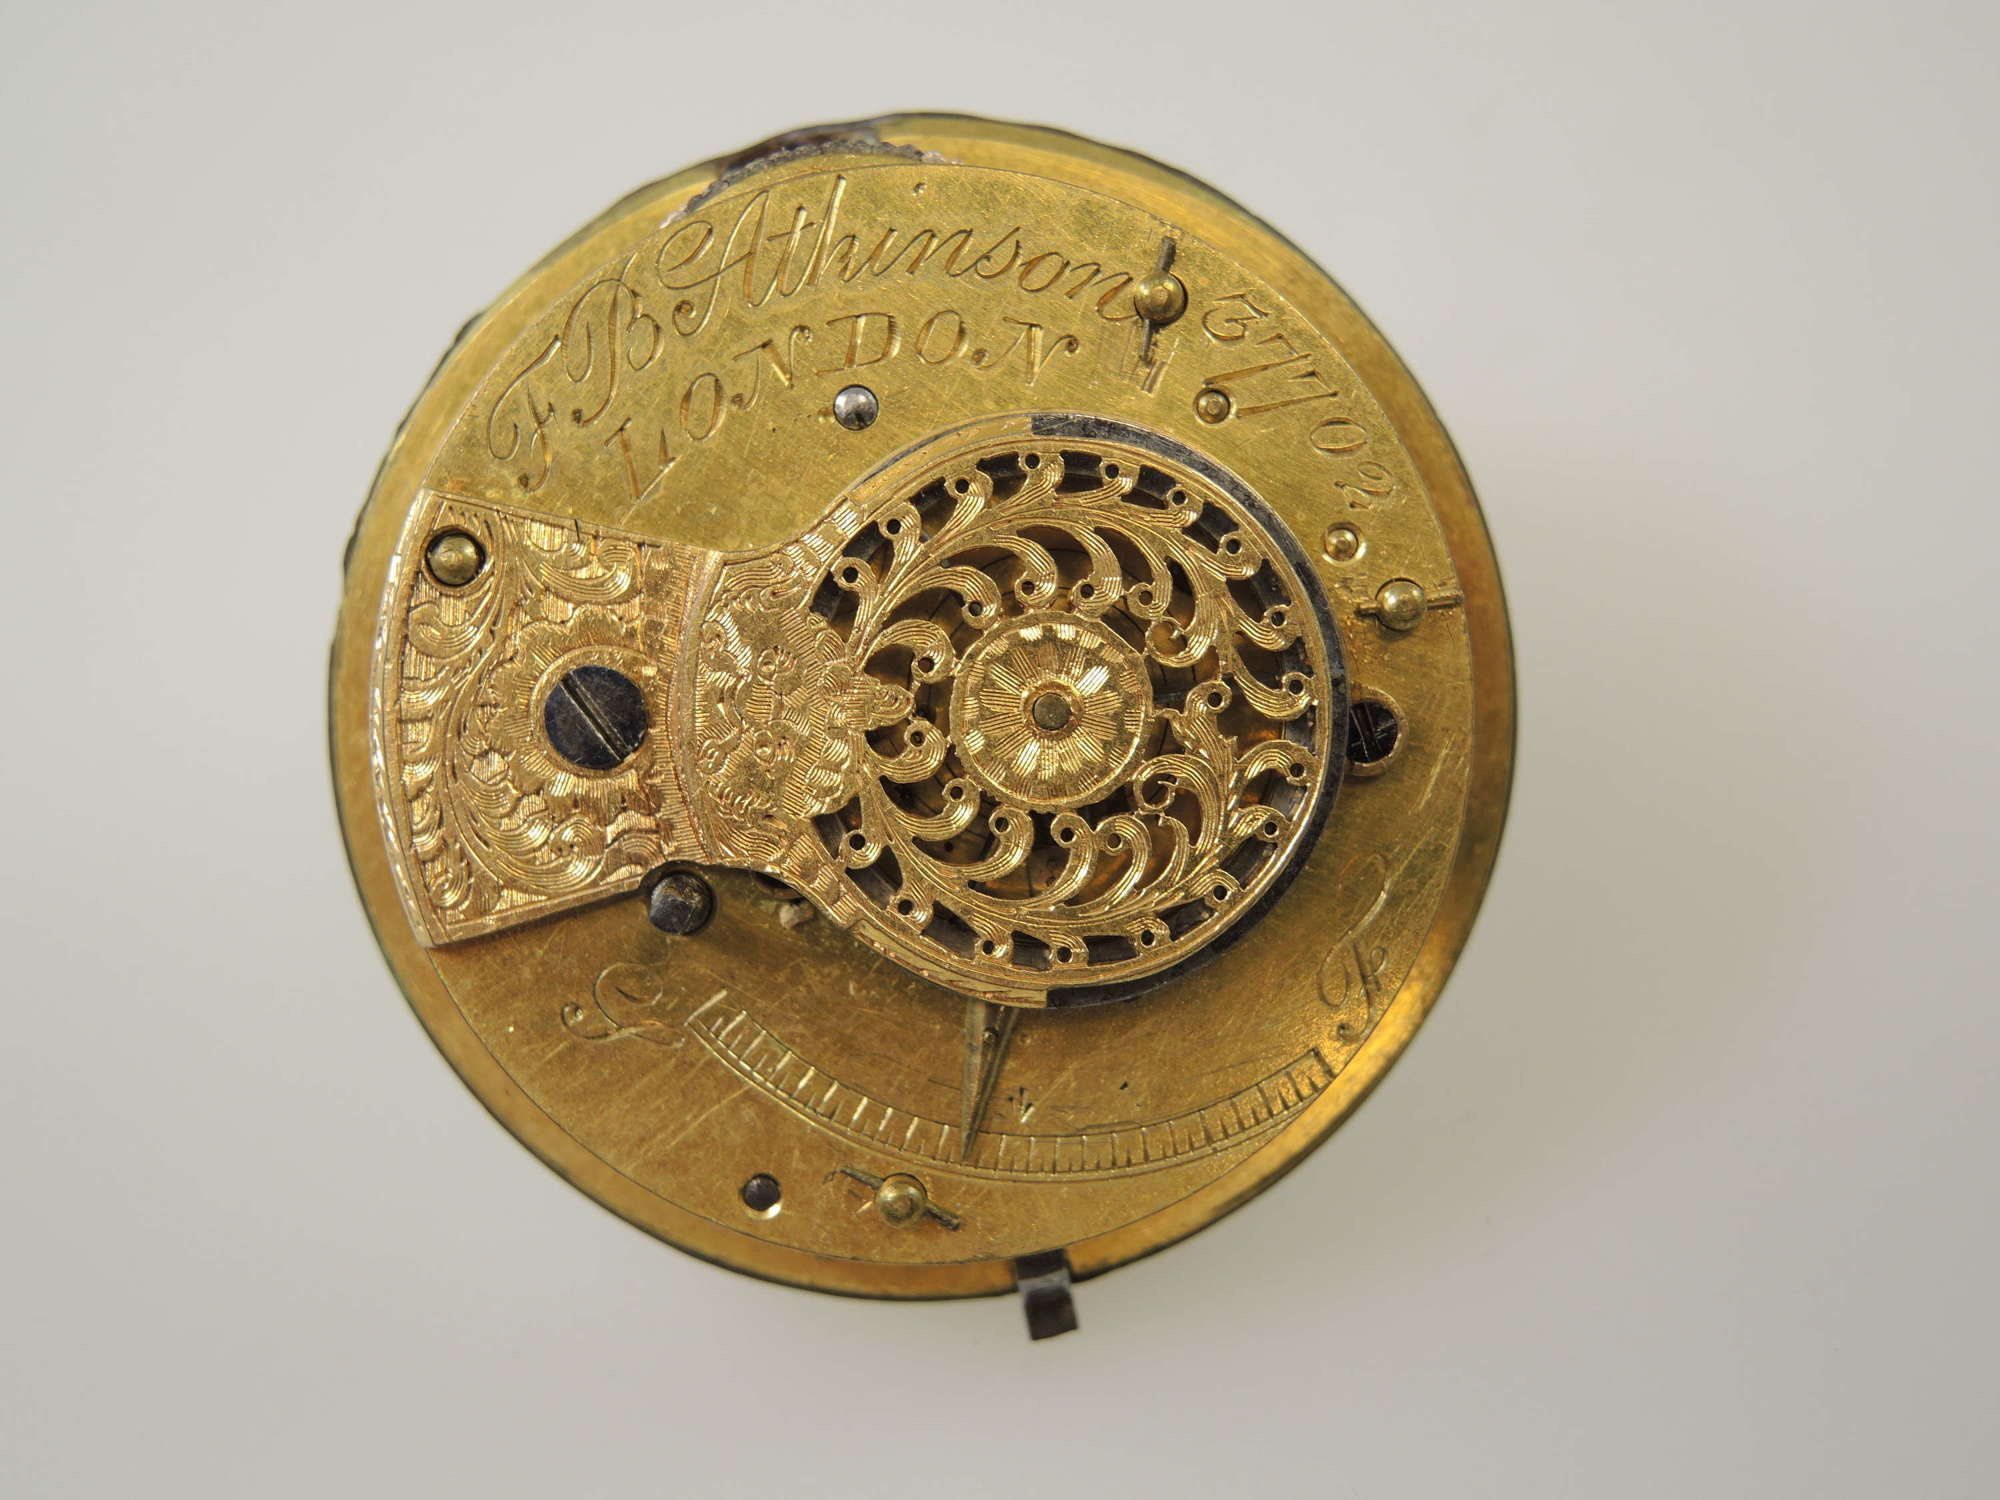 Verge fusee pocket watch movement by Athinson, London c1810